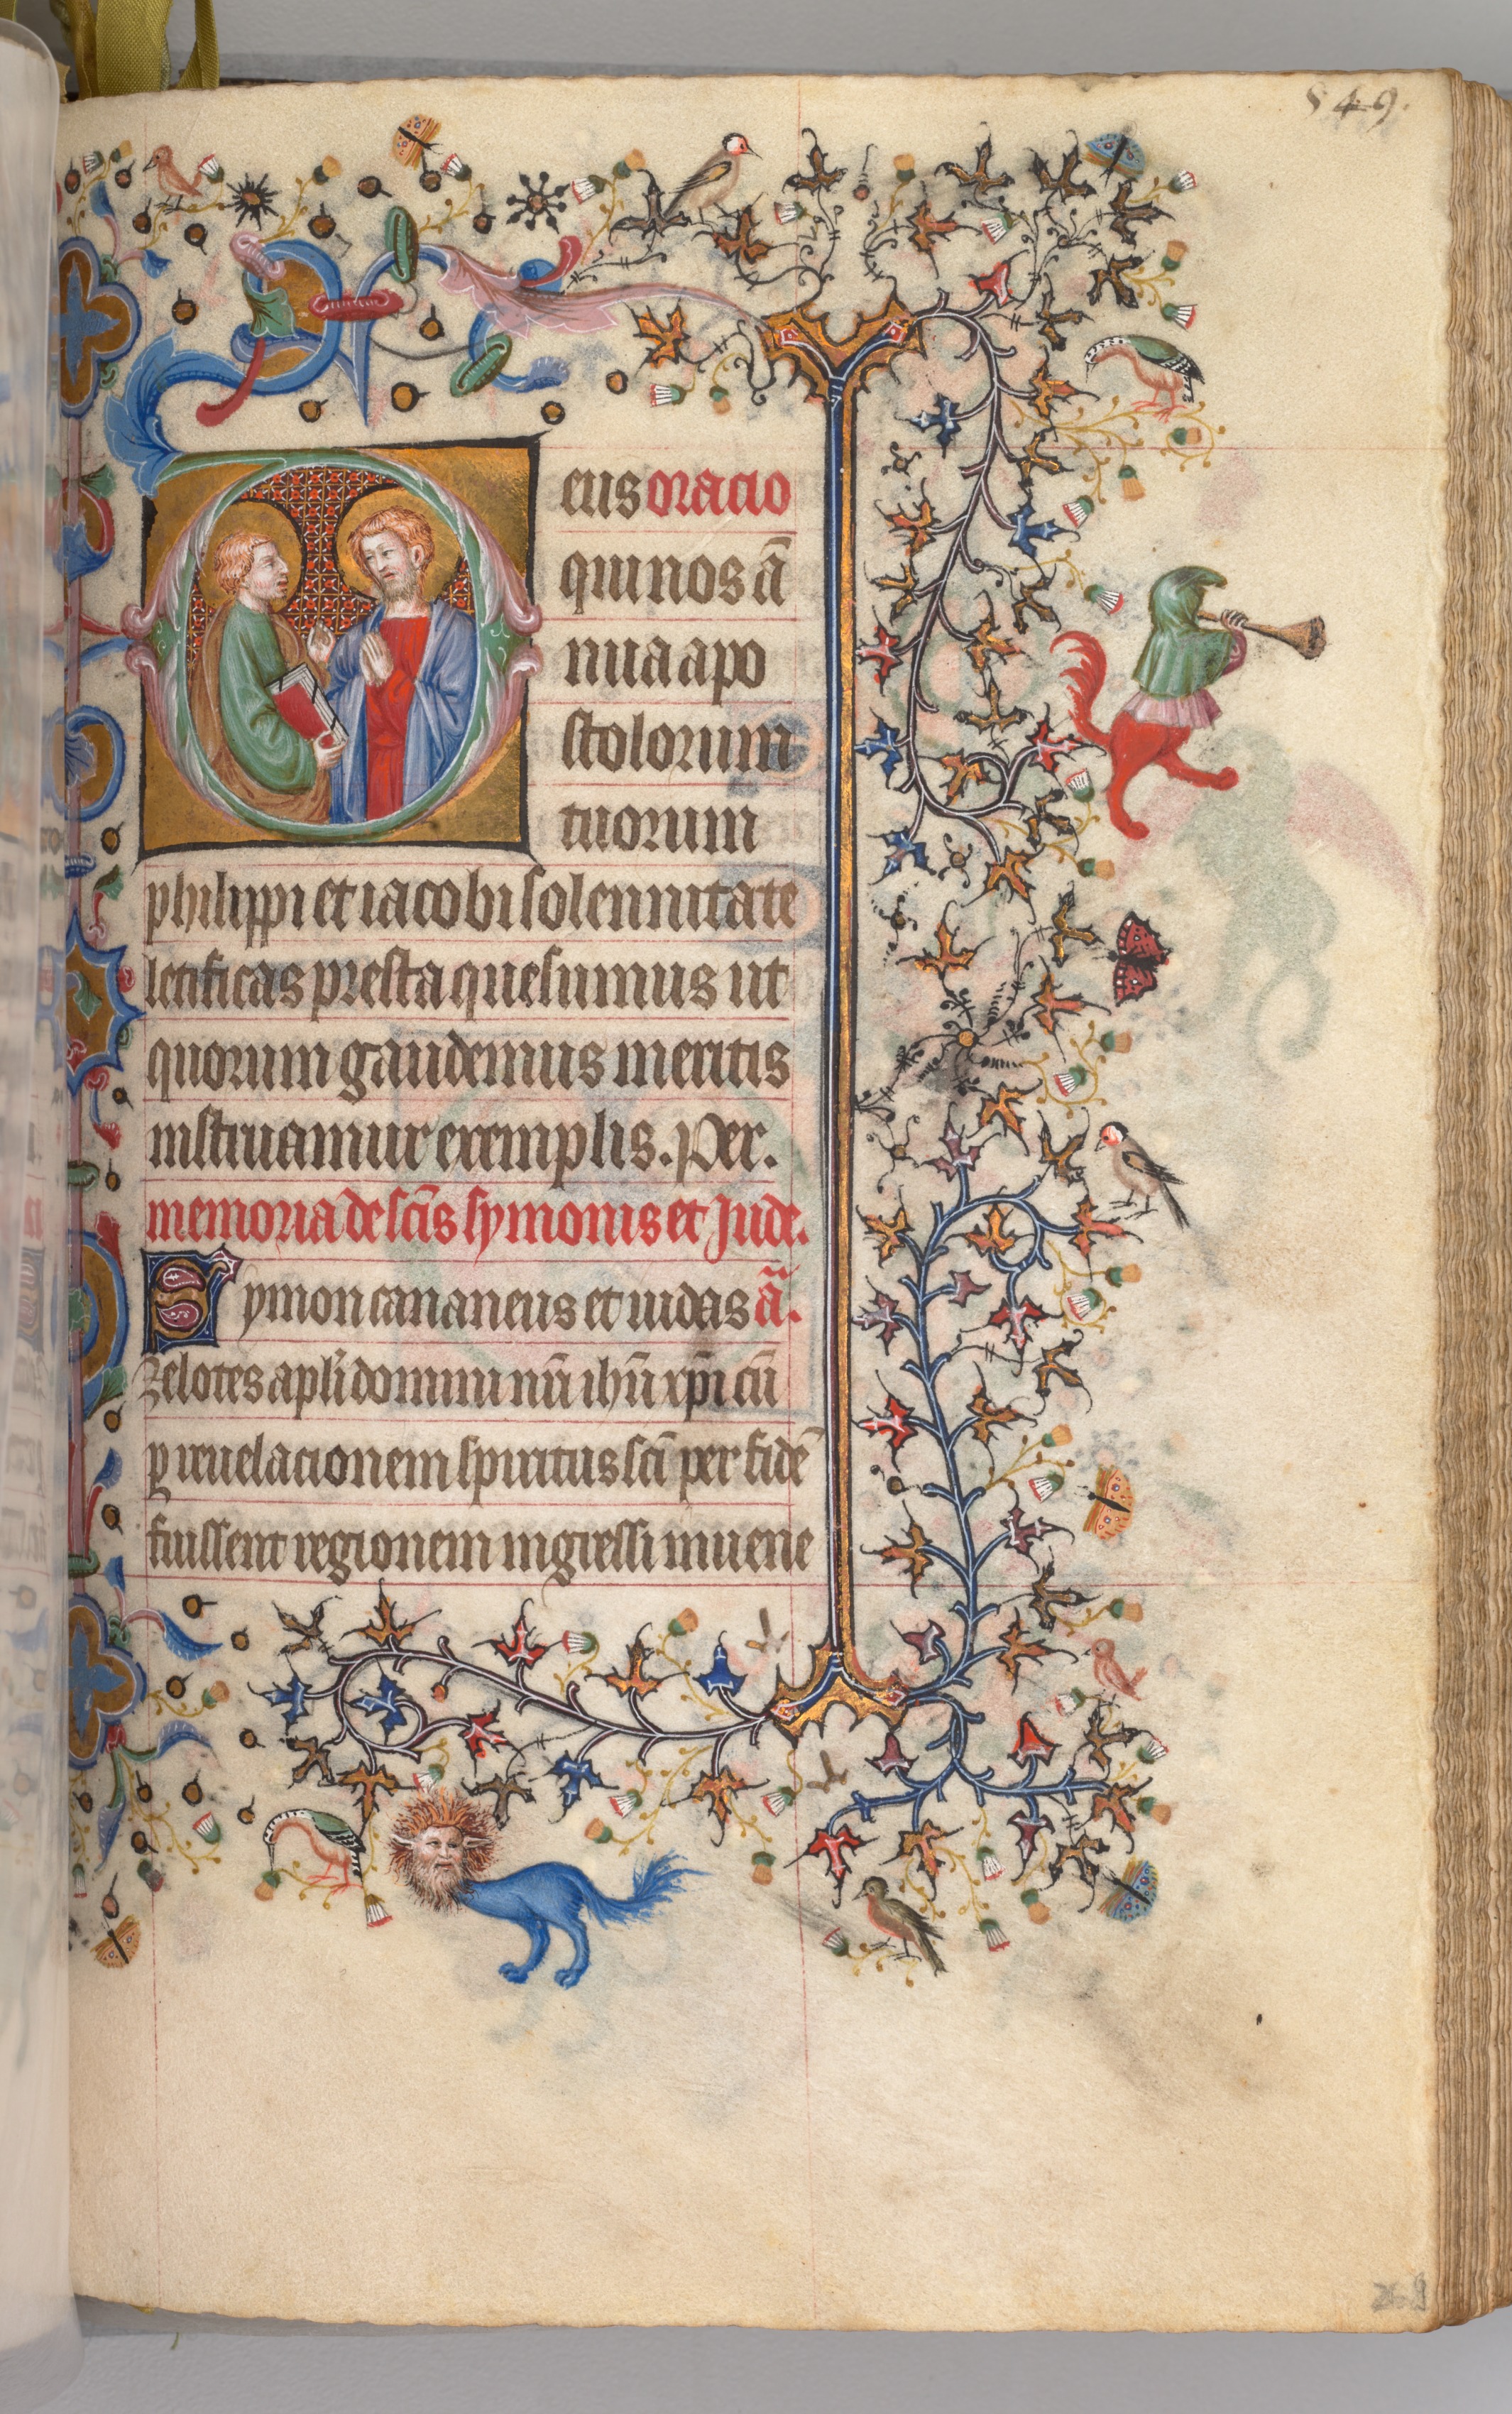 Hours of Charles the Noble, King of Navarre (1361-1425): fol. 269r, SS. Philip and James